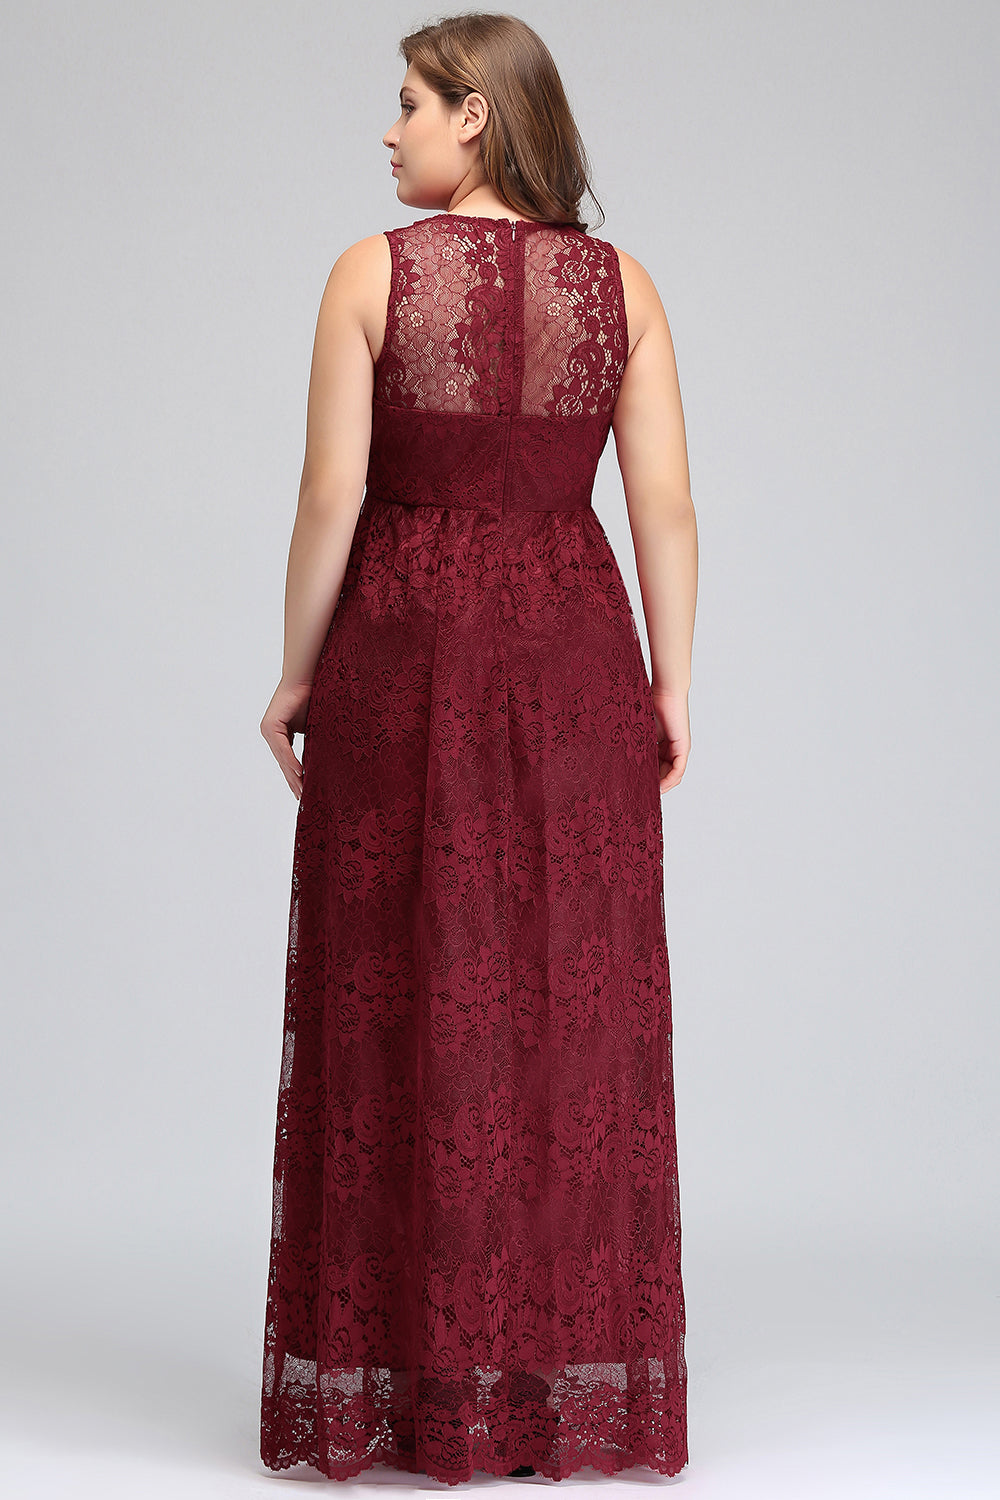 Load image into Gallery viewer, Vintage Long A-line Deep V-neck Lace Bridesmaid Dress-BIZTUNNEL
